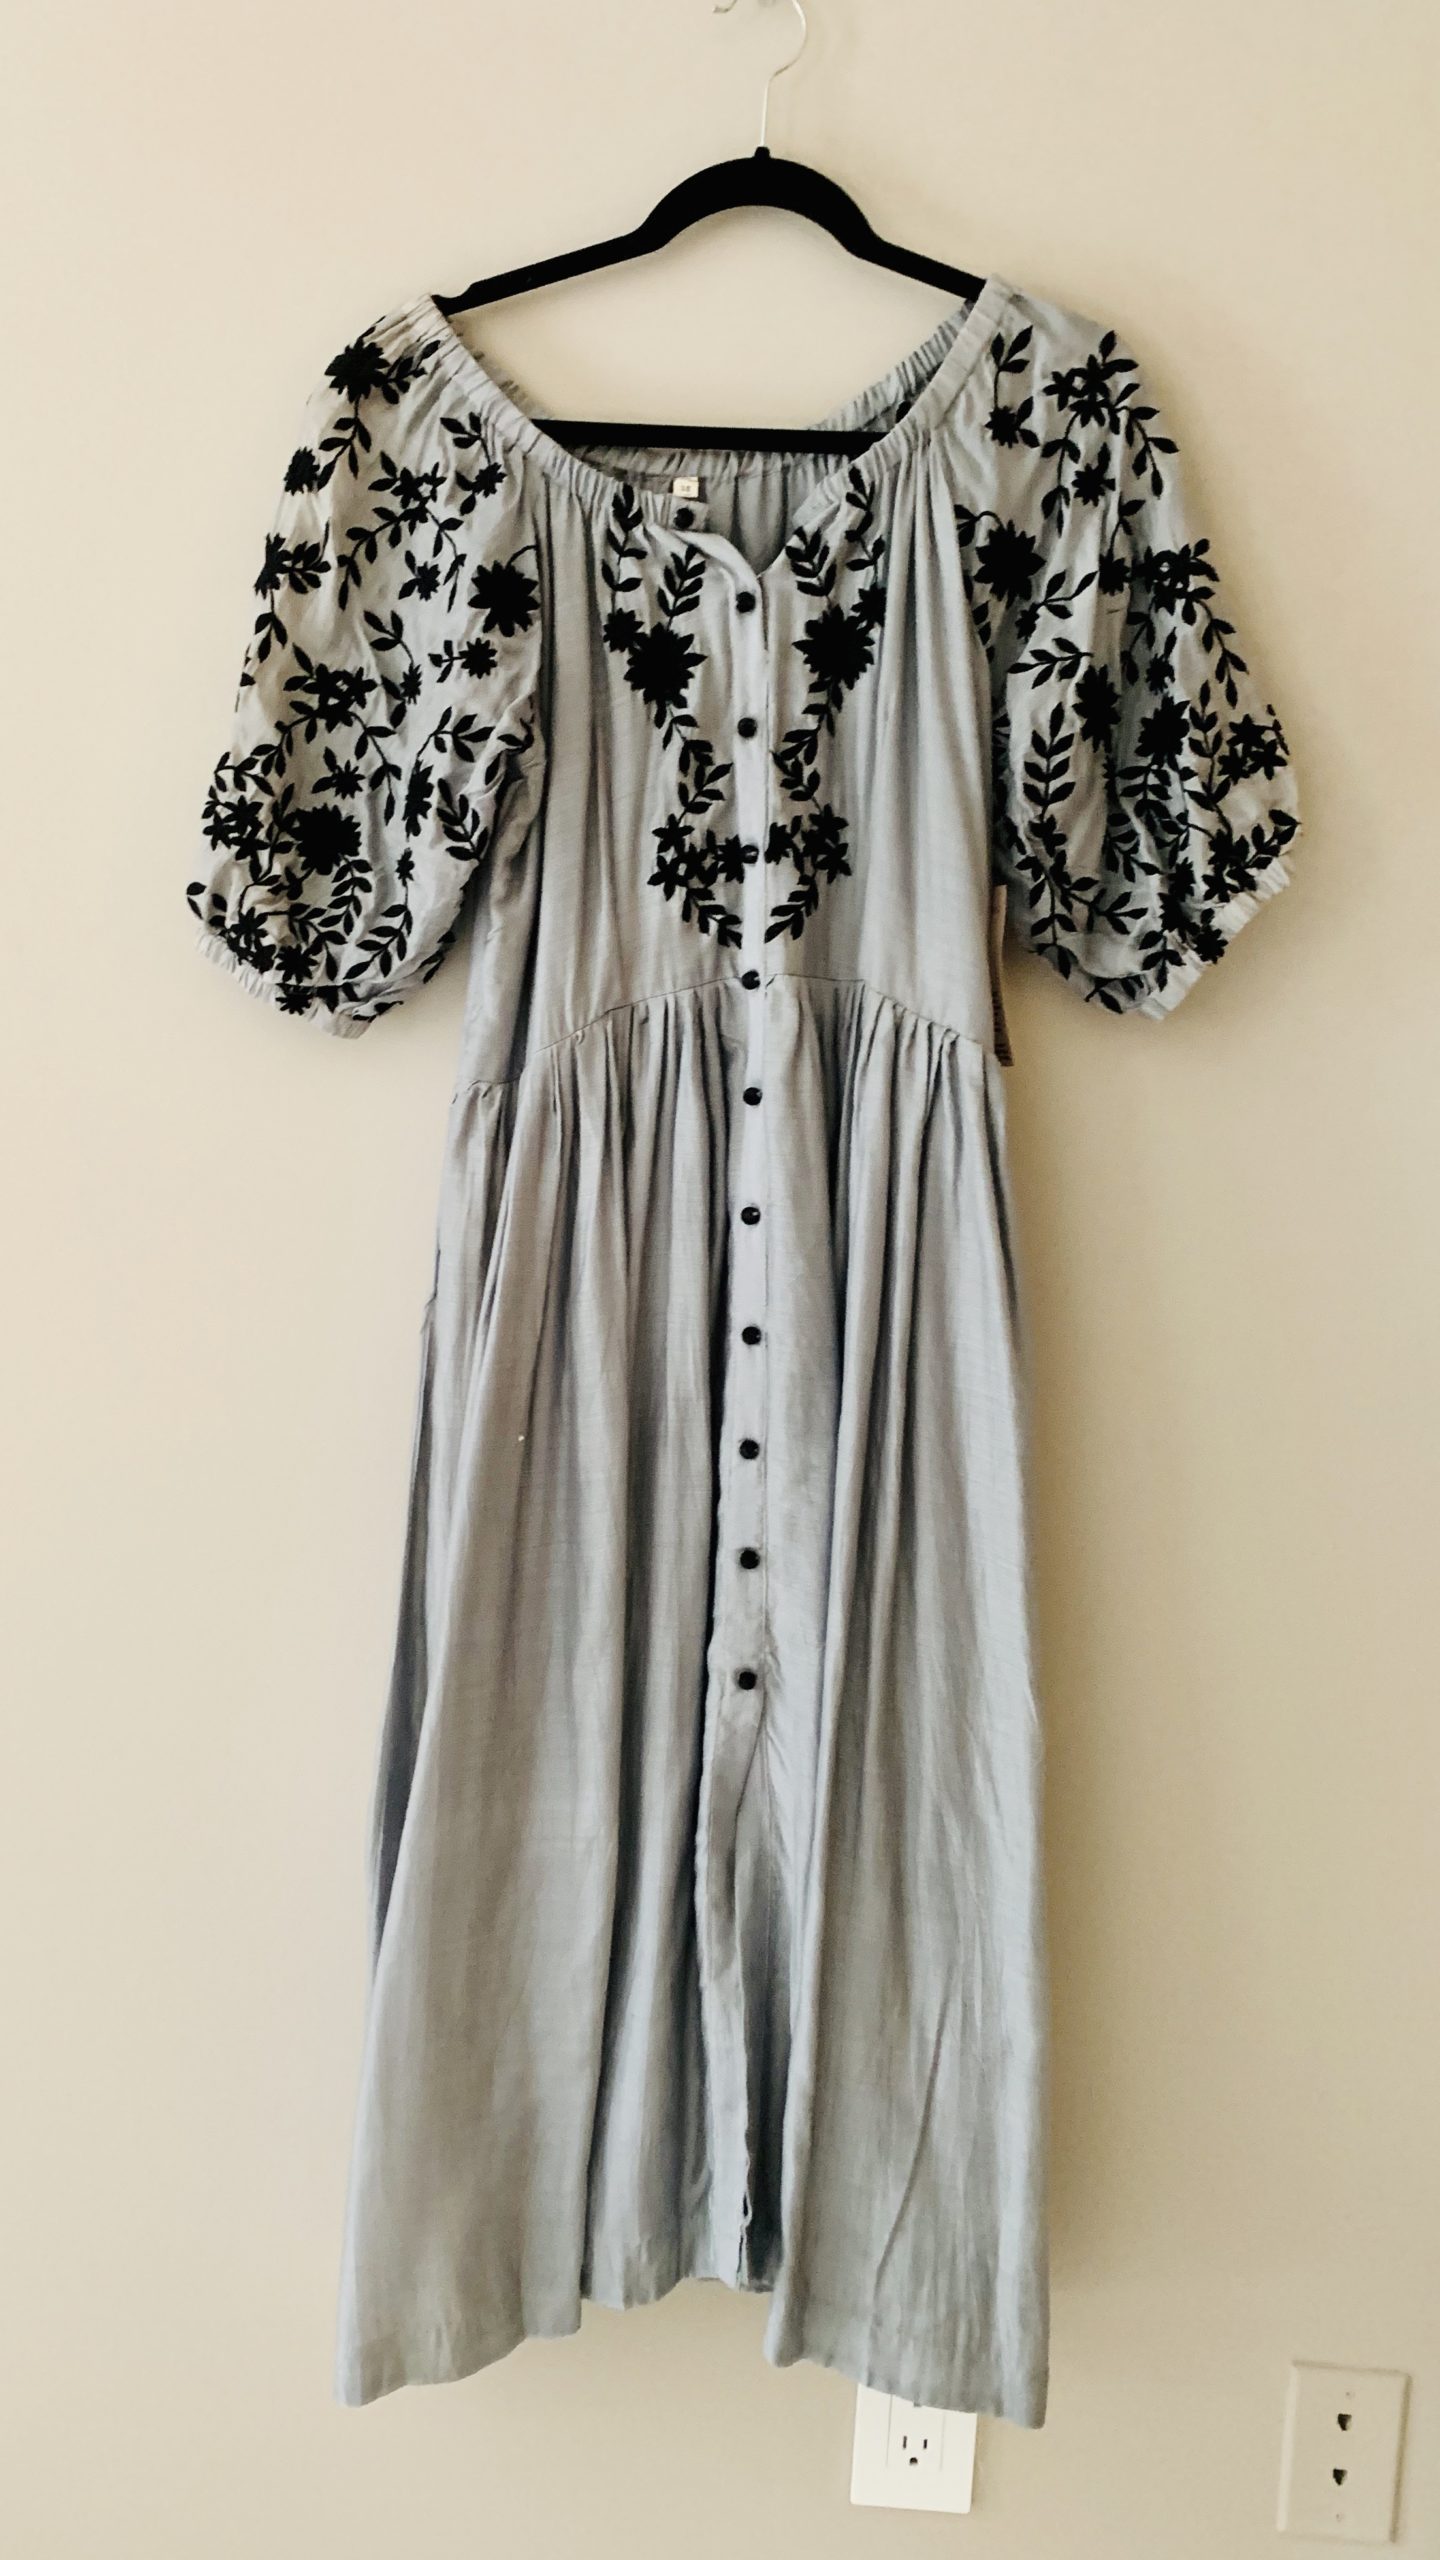 Embroidered western style long dress Size Medium 38 - NetraDesignSolutions